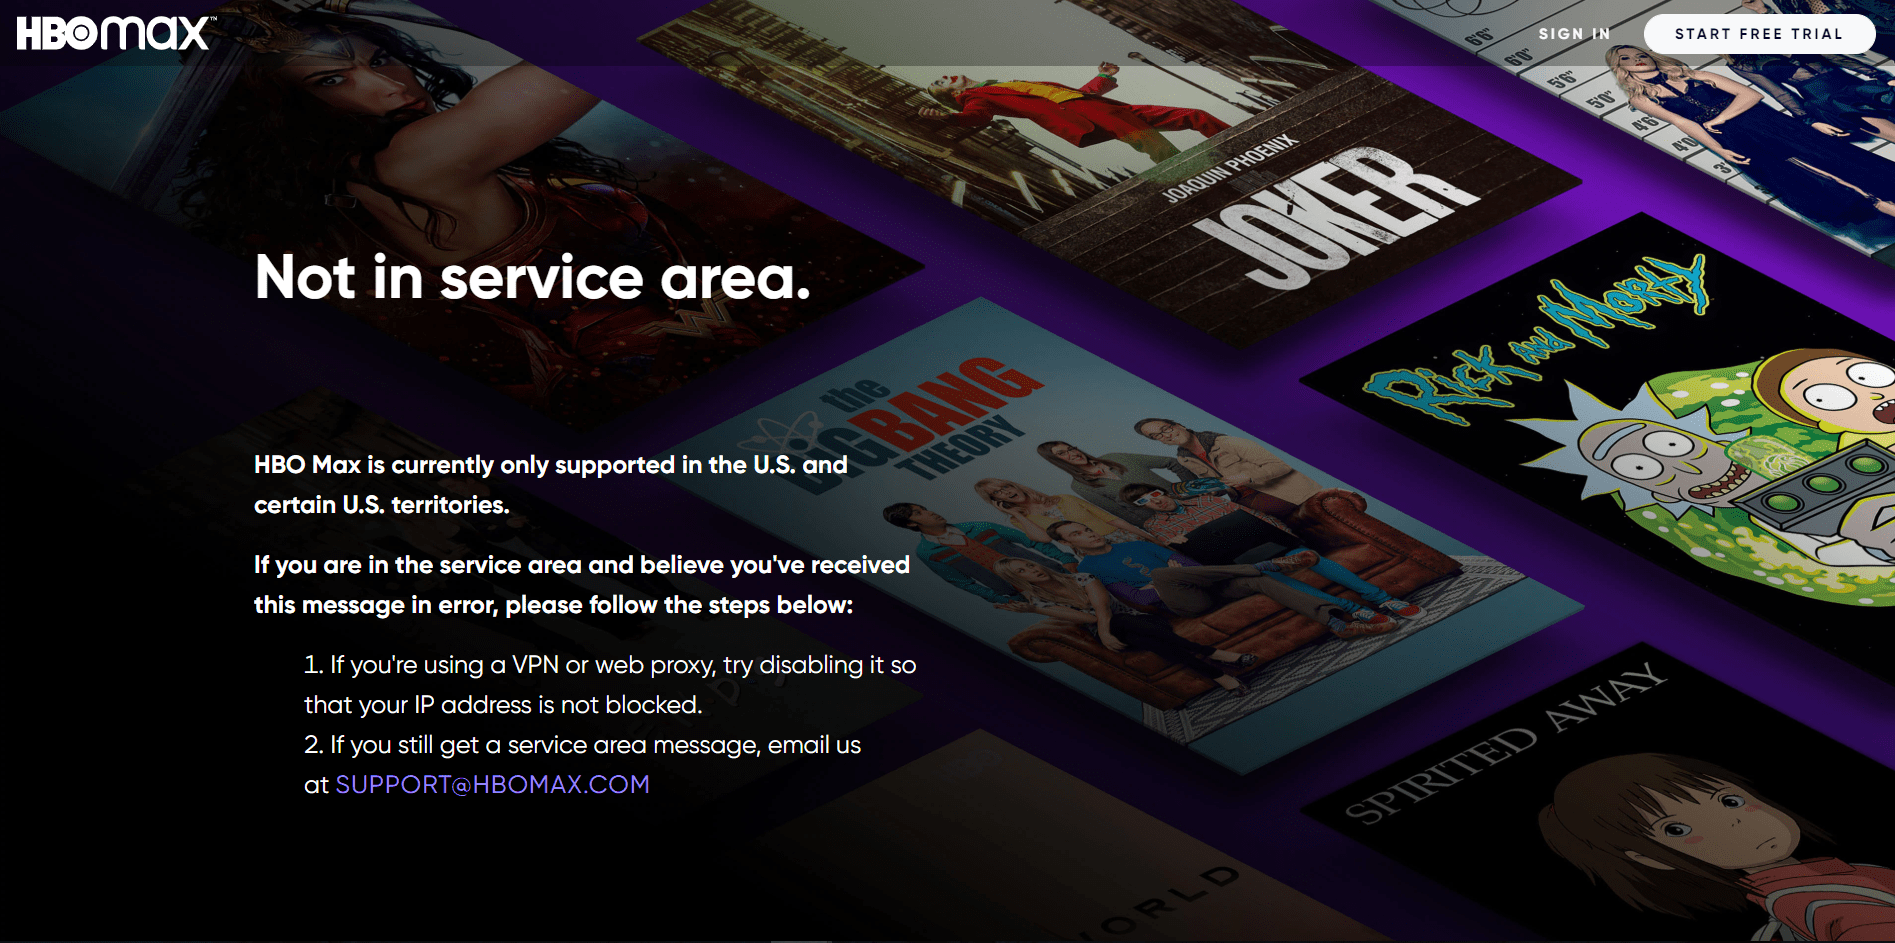 Screenshot of HBO Max Not in Service Area screen